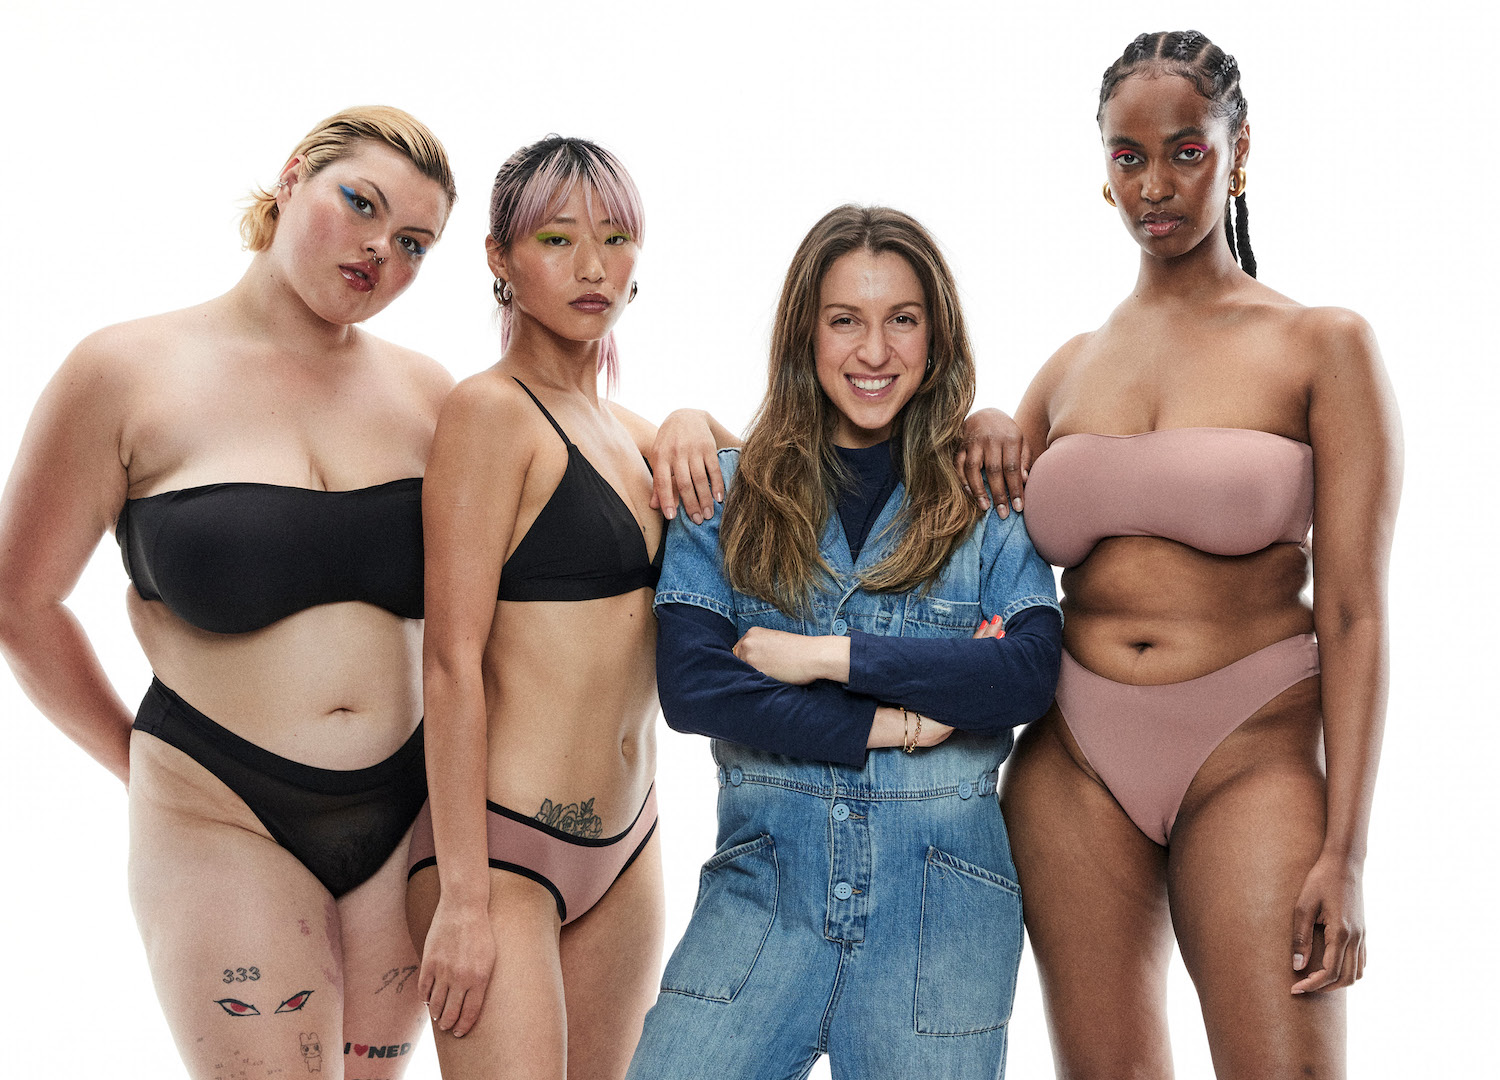 Nala: Fit Guide Shows Diverse Breasts For Bra Shopping